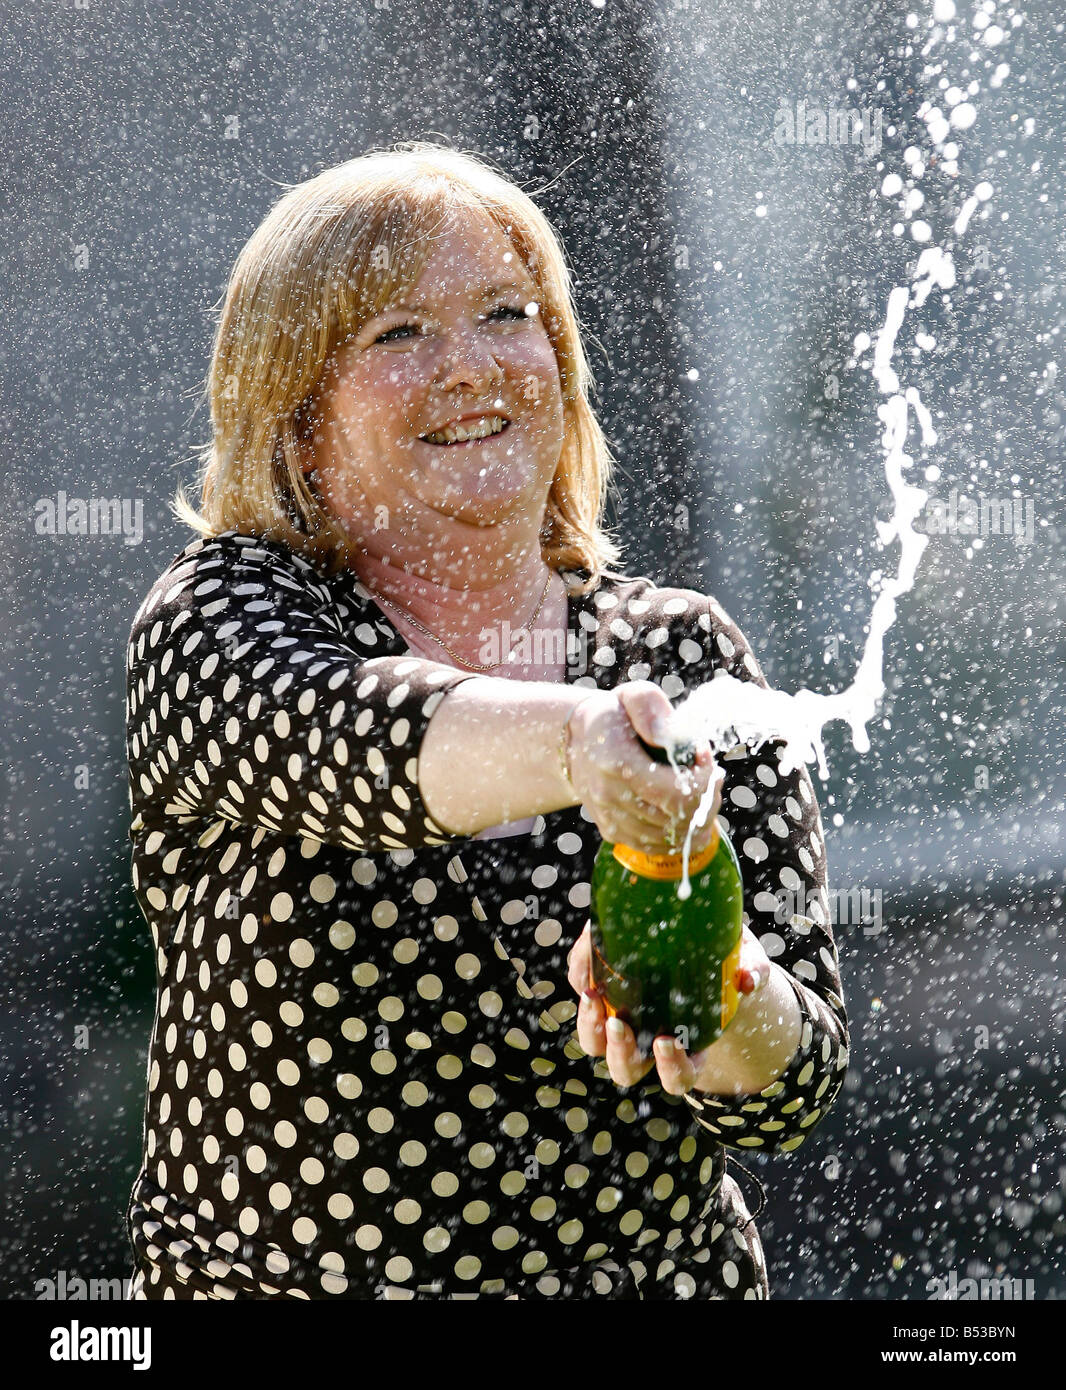 Record Euro Lottery winner Angela Kelly celebrates her win in front of assembled media, August 15, 2007 in Falkirk Scotland. Stock Photo